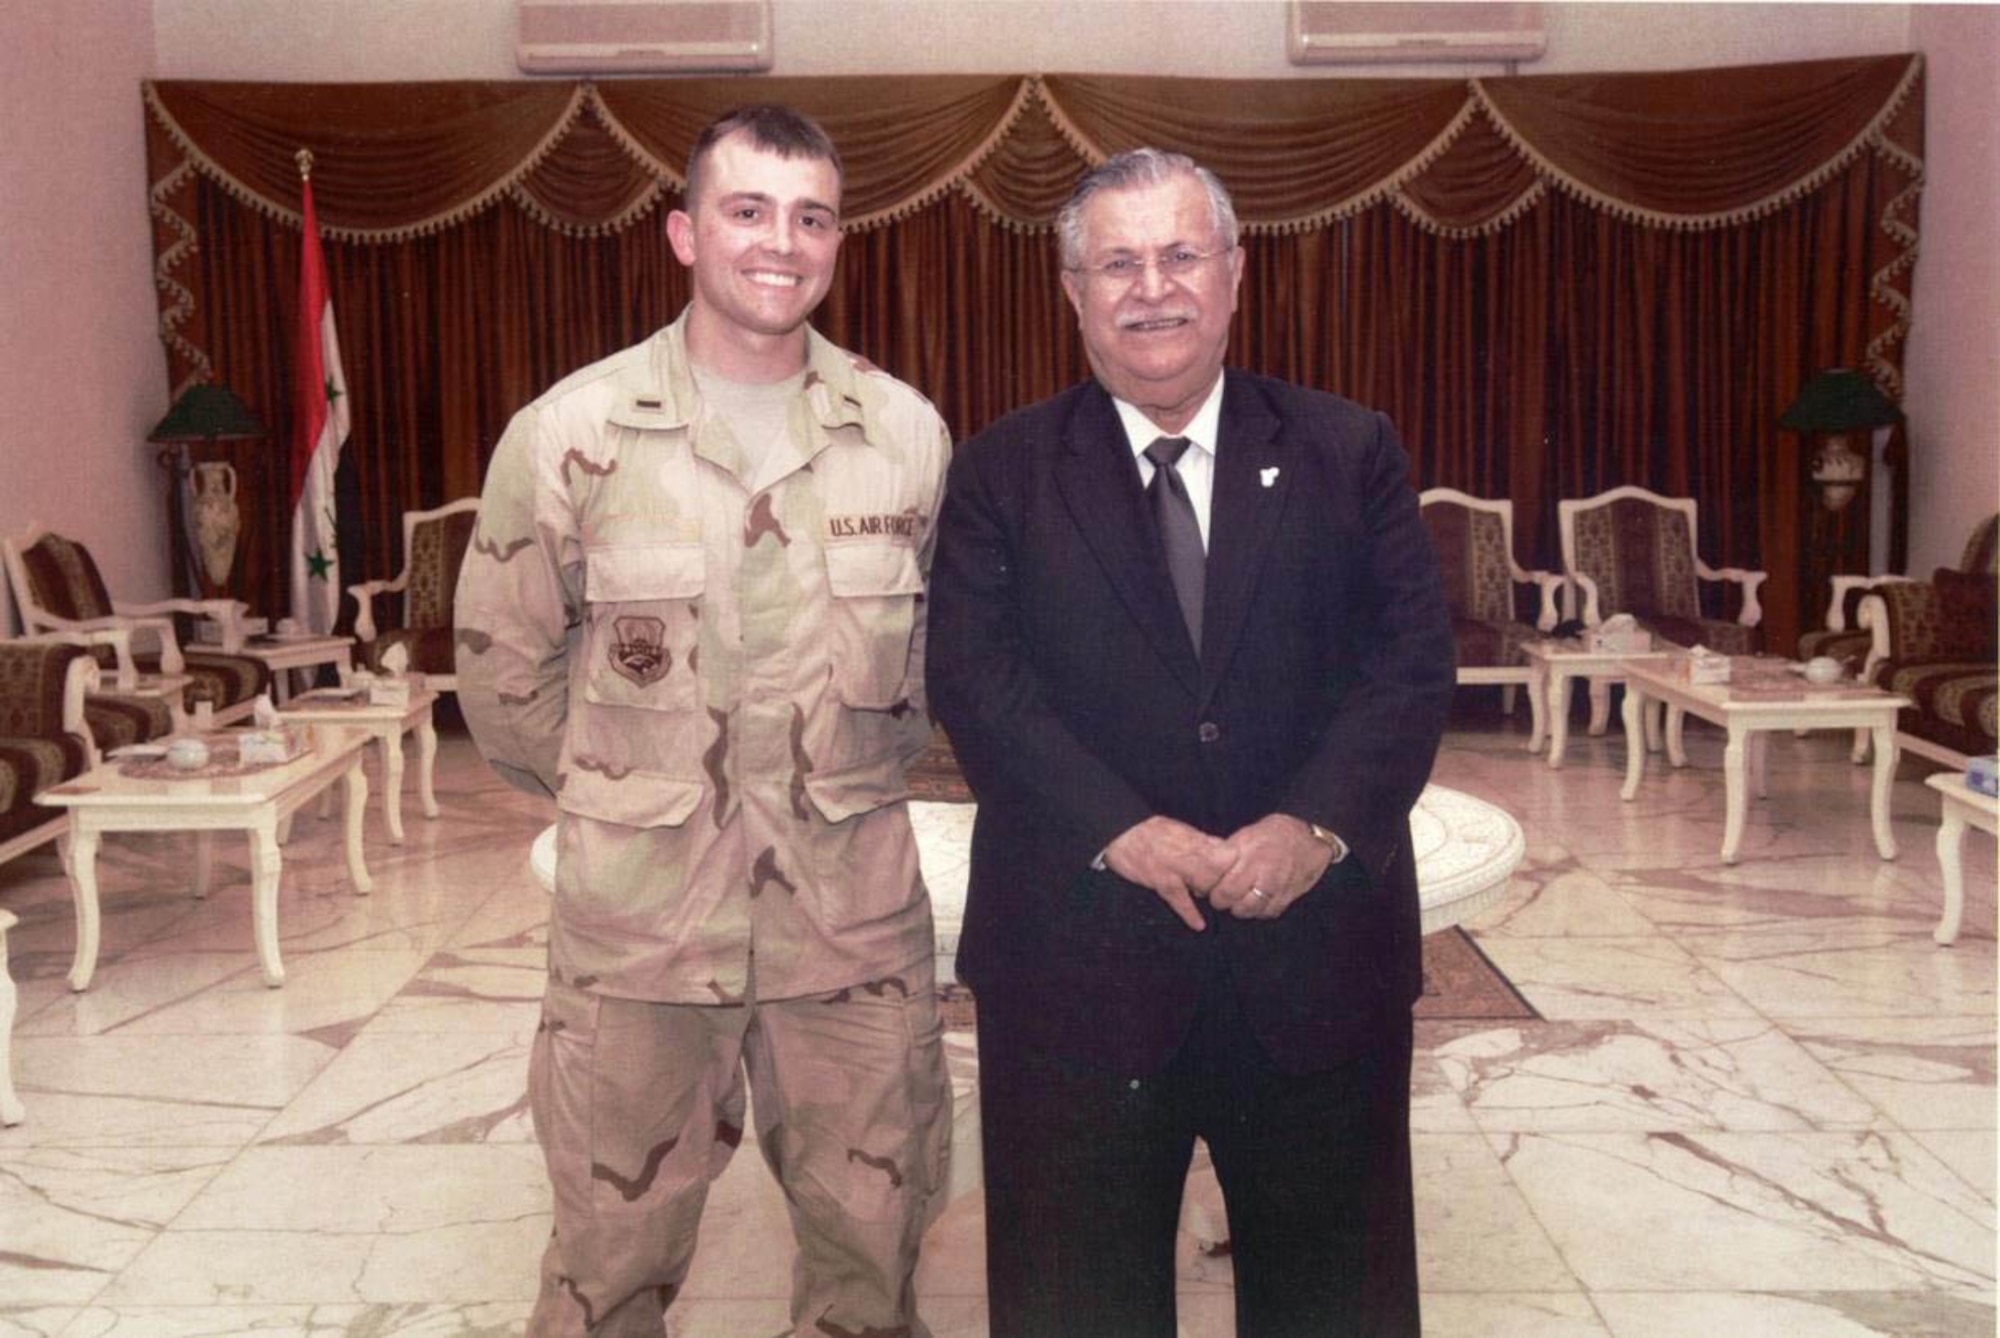 A young Lt. Col. Robert, now-15th Attack Squadron commander, stands alongside then-President of Iraq, President Talibani in Baghdad, Iraq, May 2007.